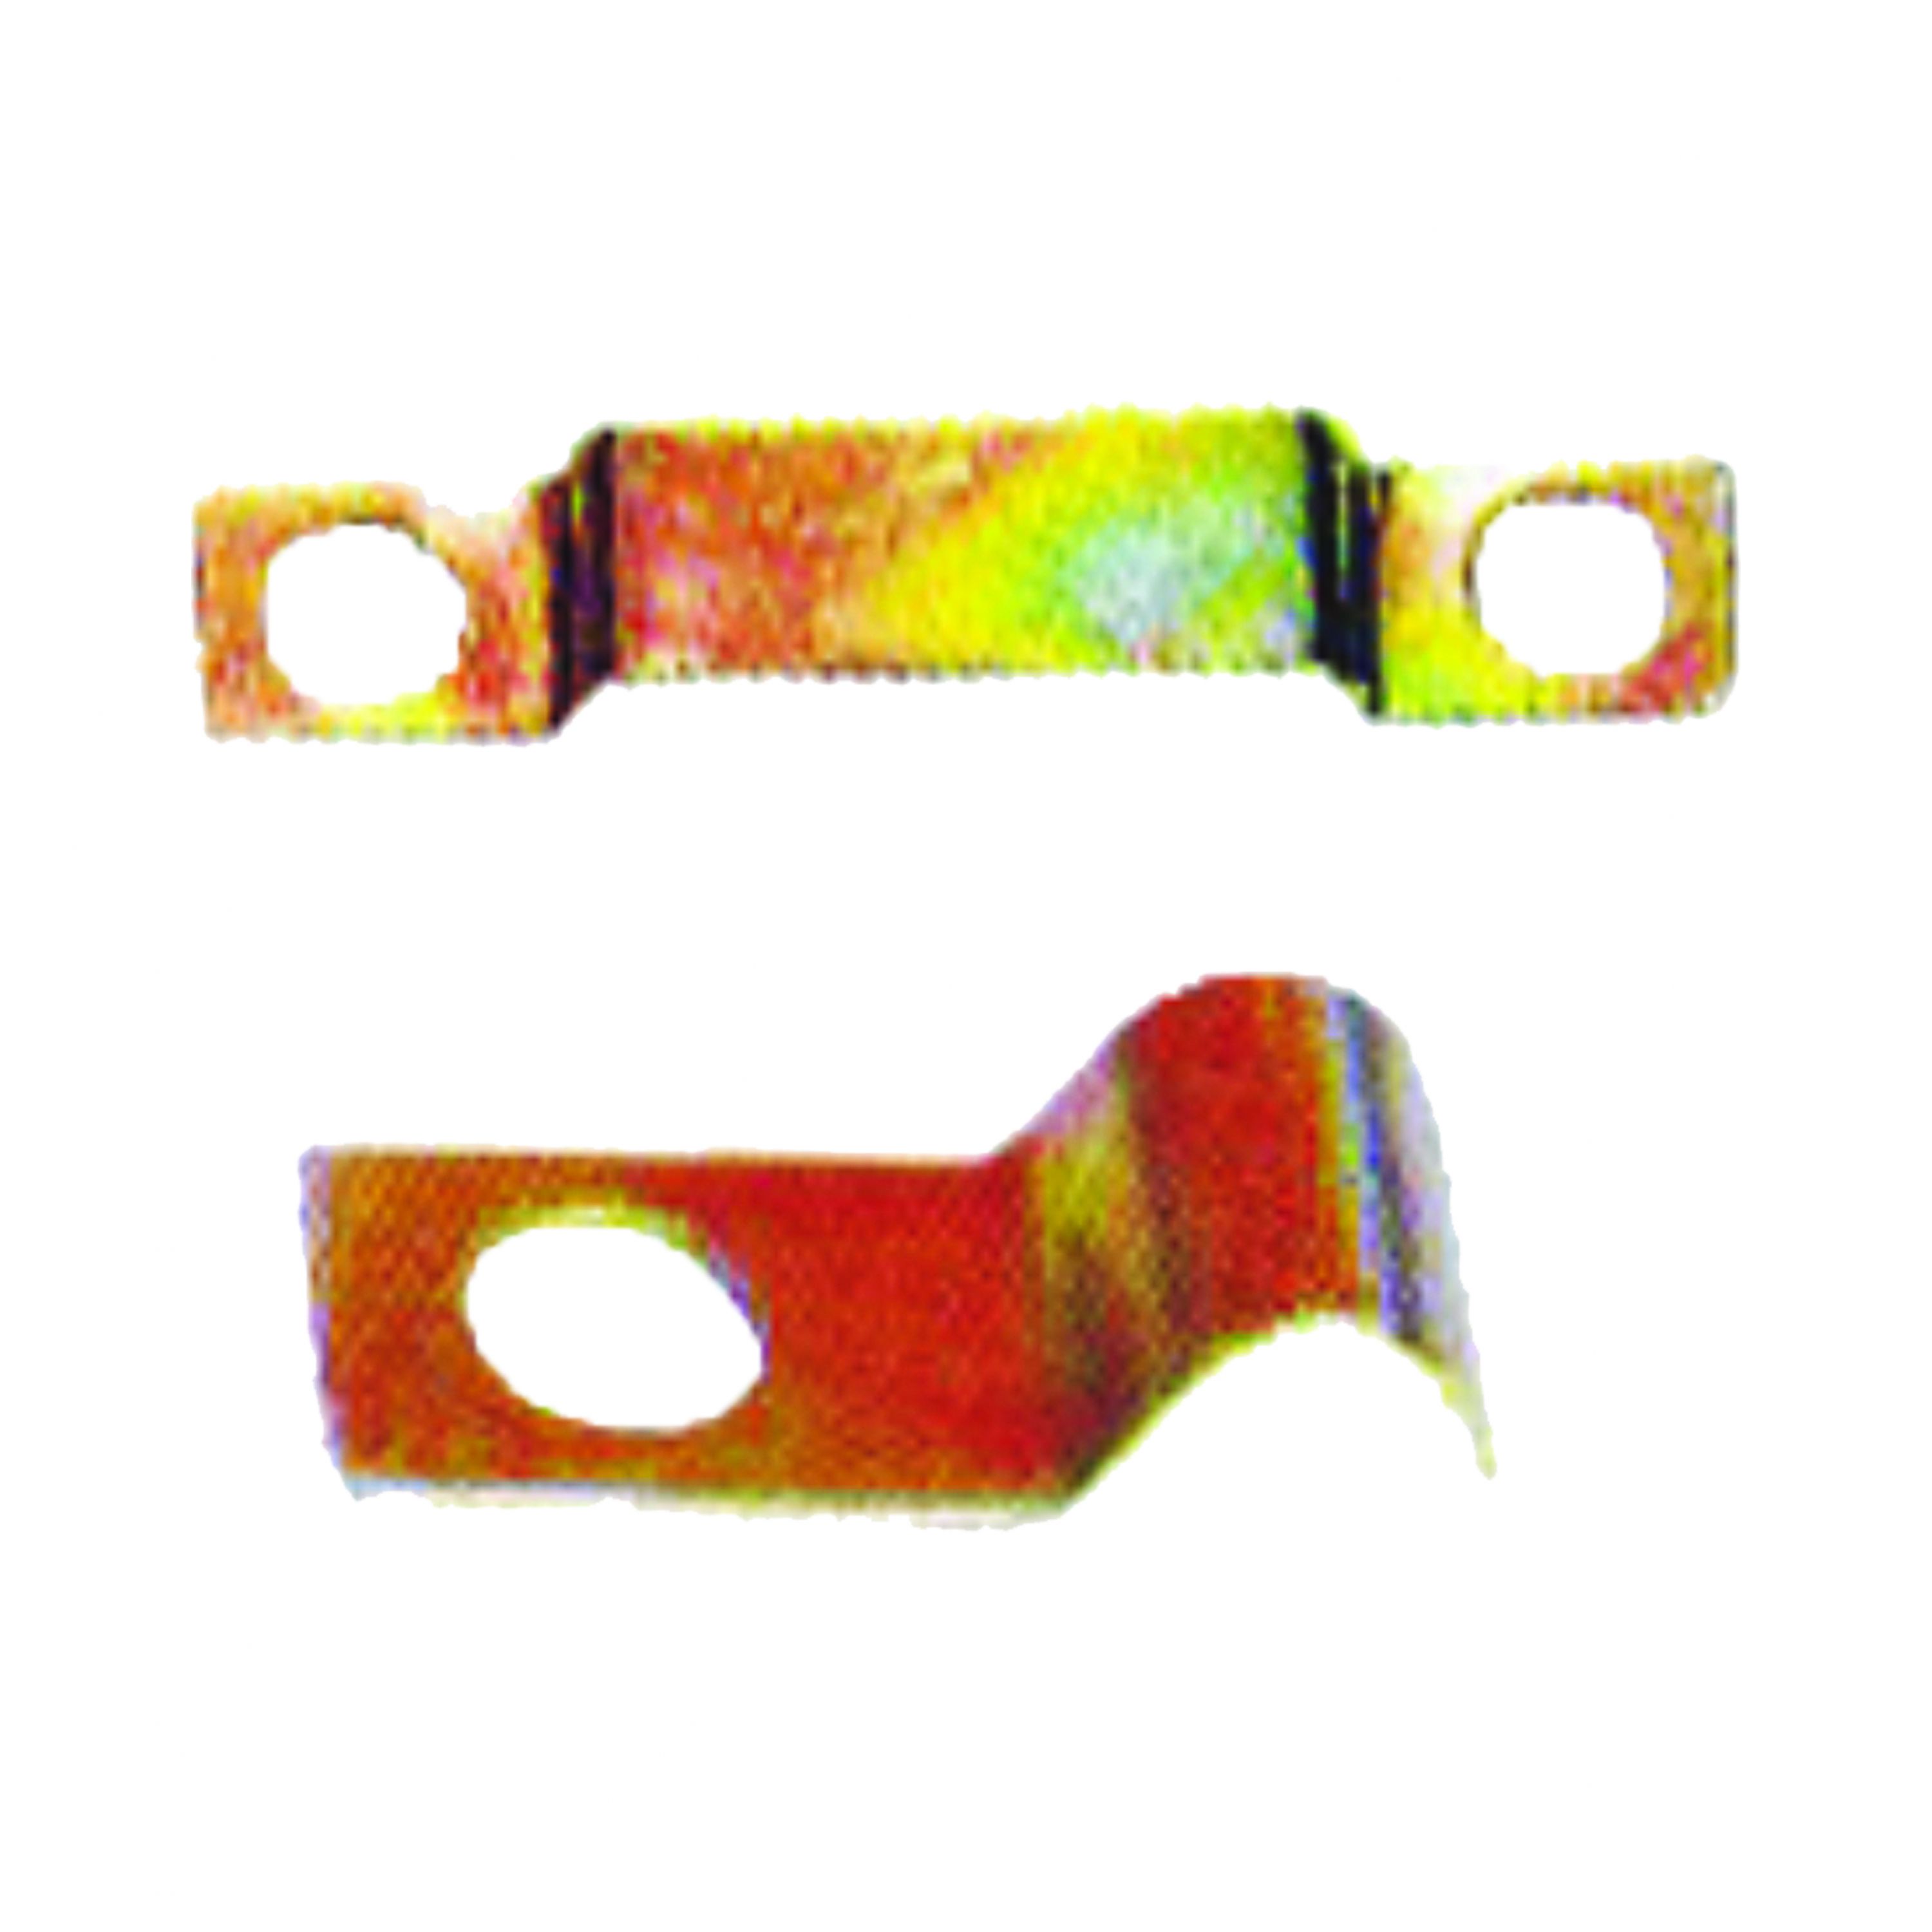 pipe clamp image